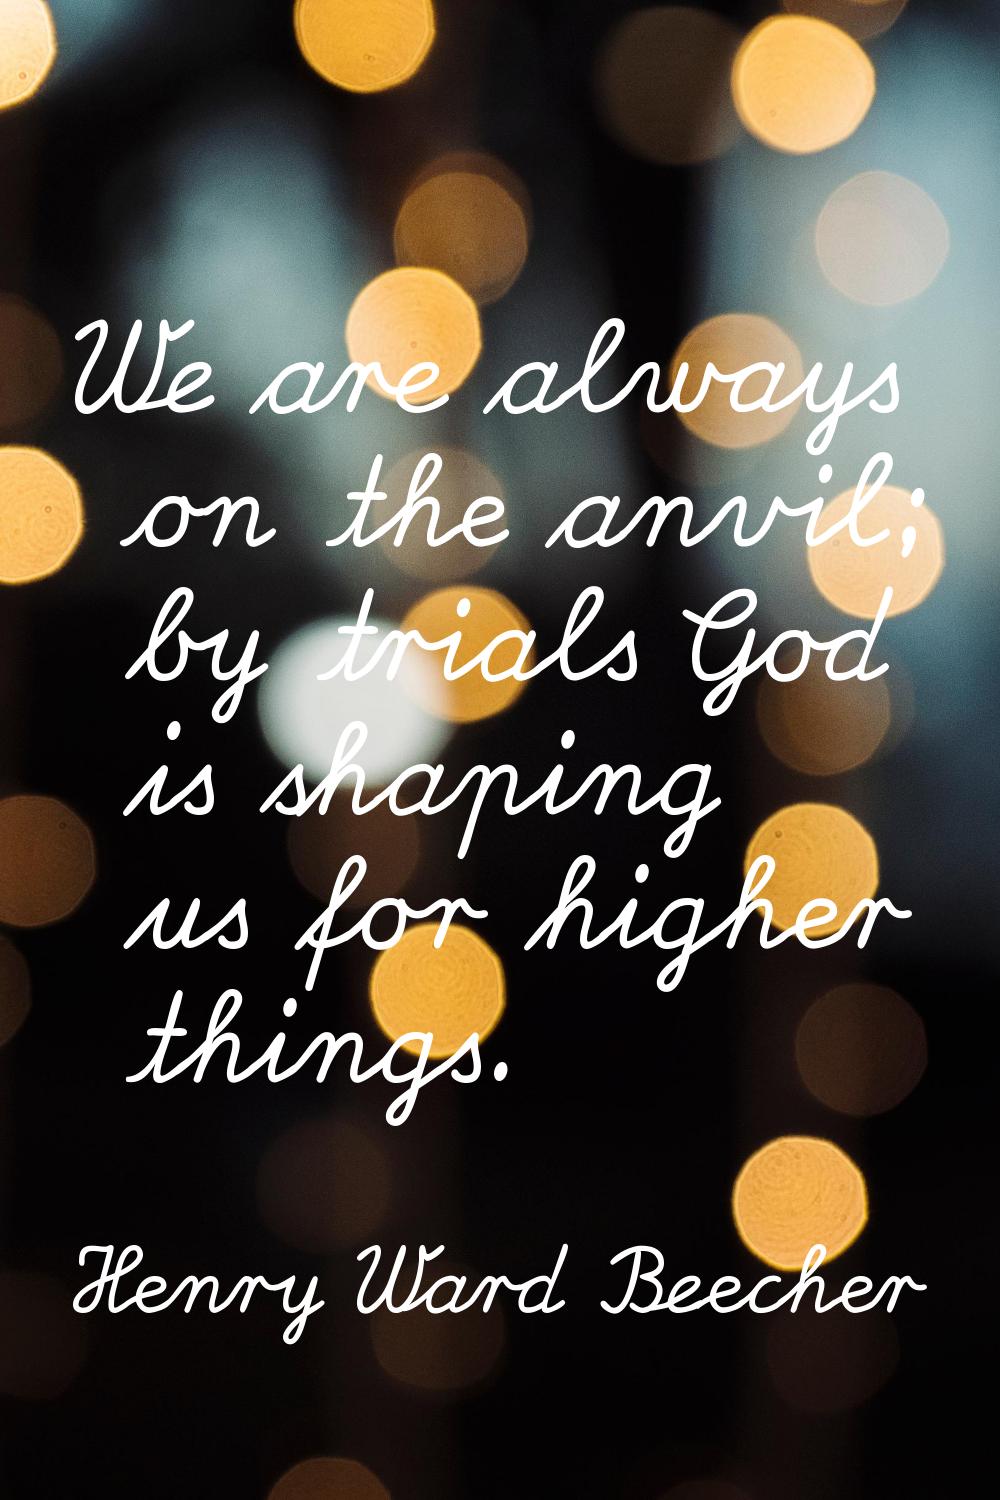 We are always on the anvil; by trials God is shaping us for higher things.